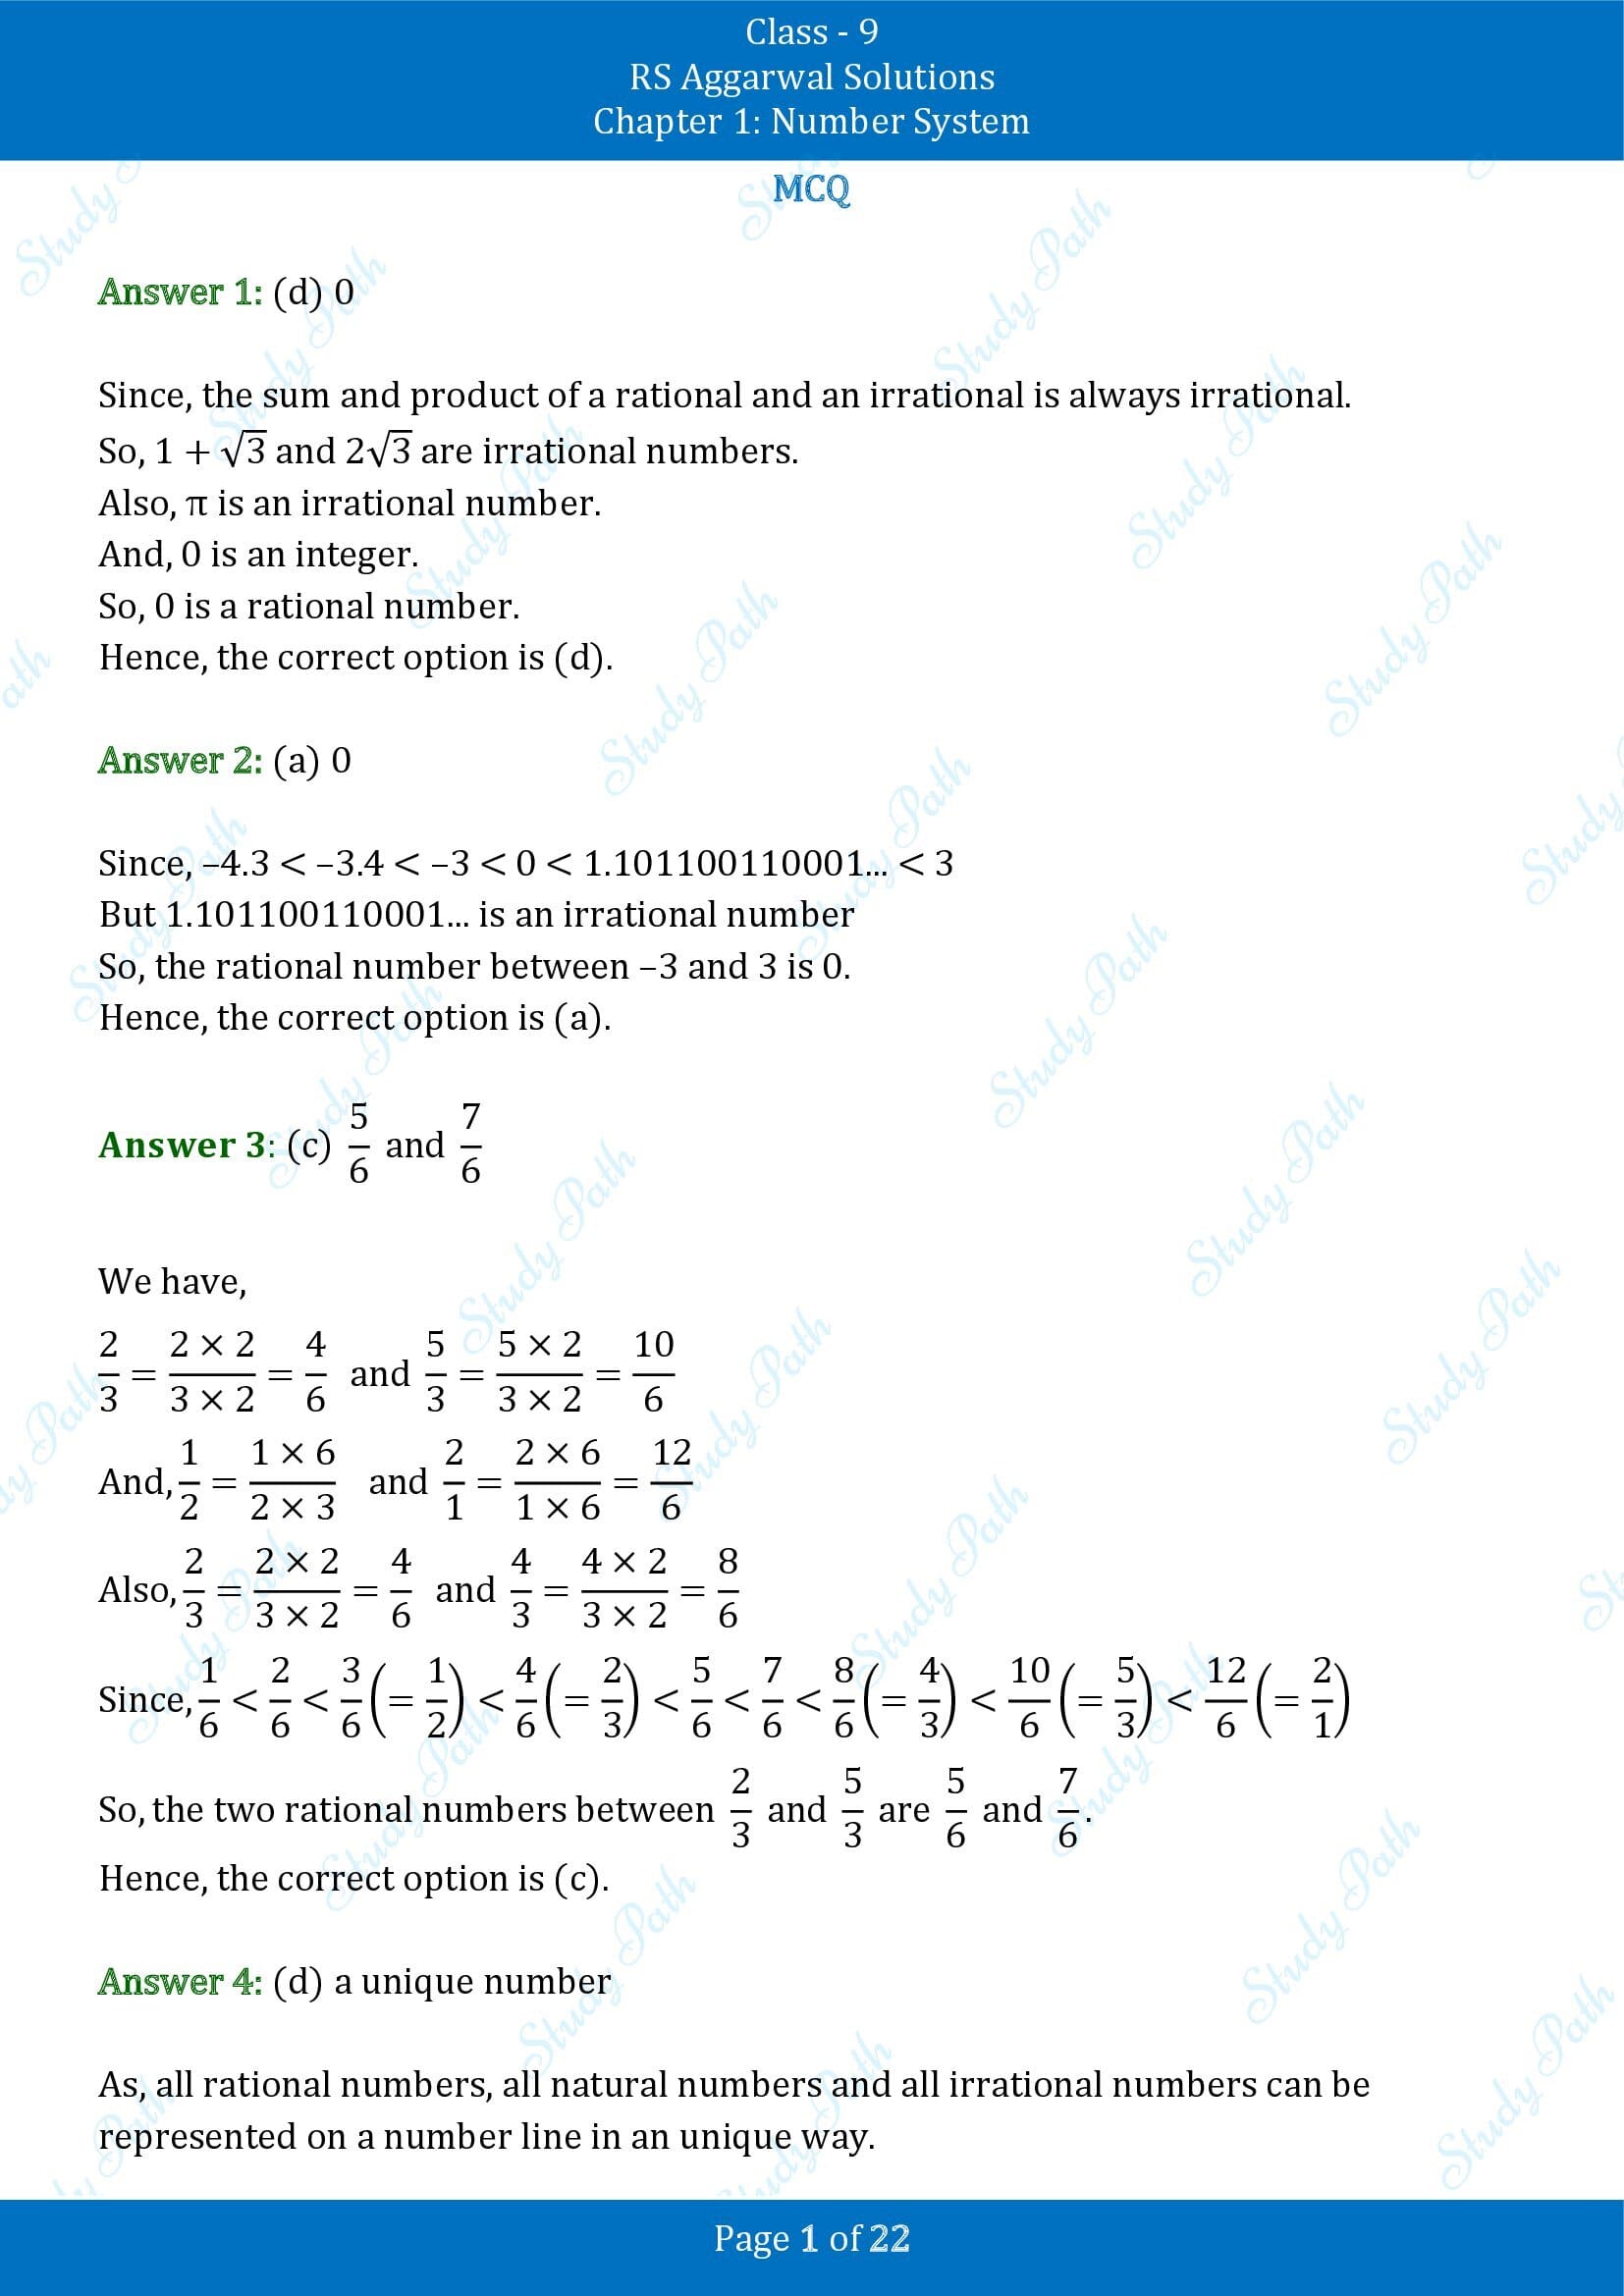 RS Aggarwal Solutions Class 9 Chapter 1 Number System Multiple Choice Questions MCQs 00001